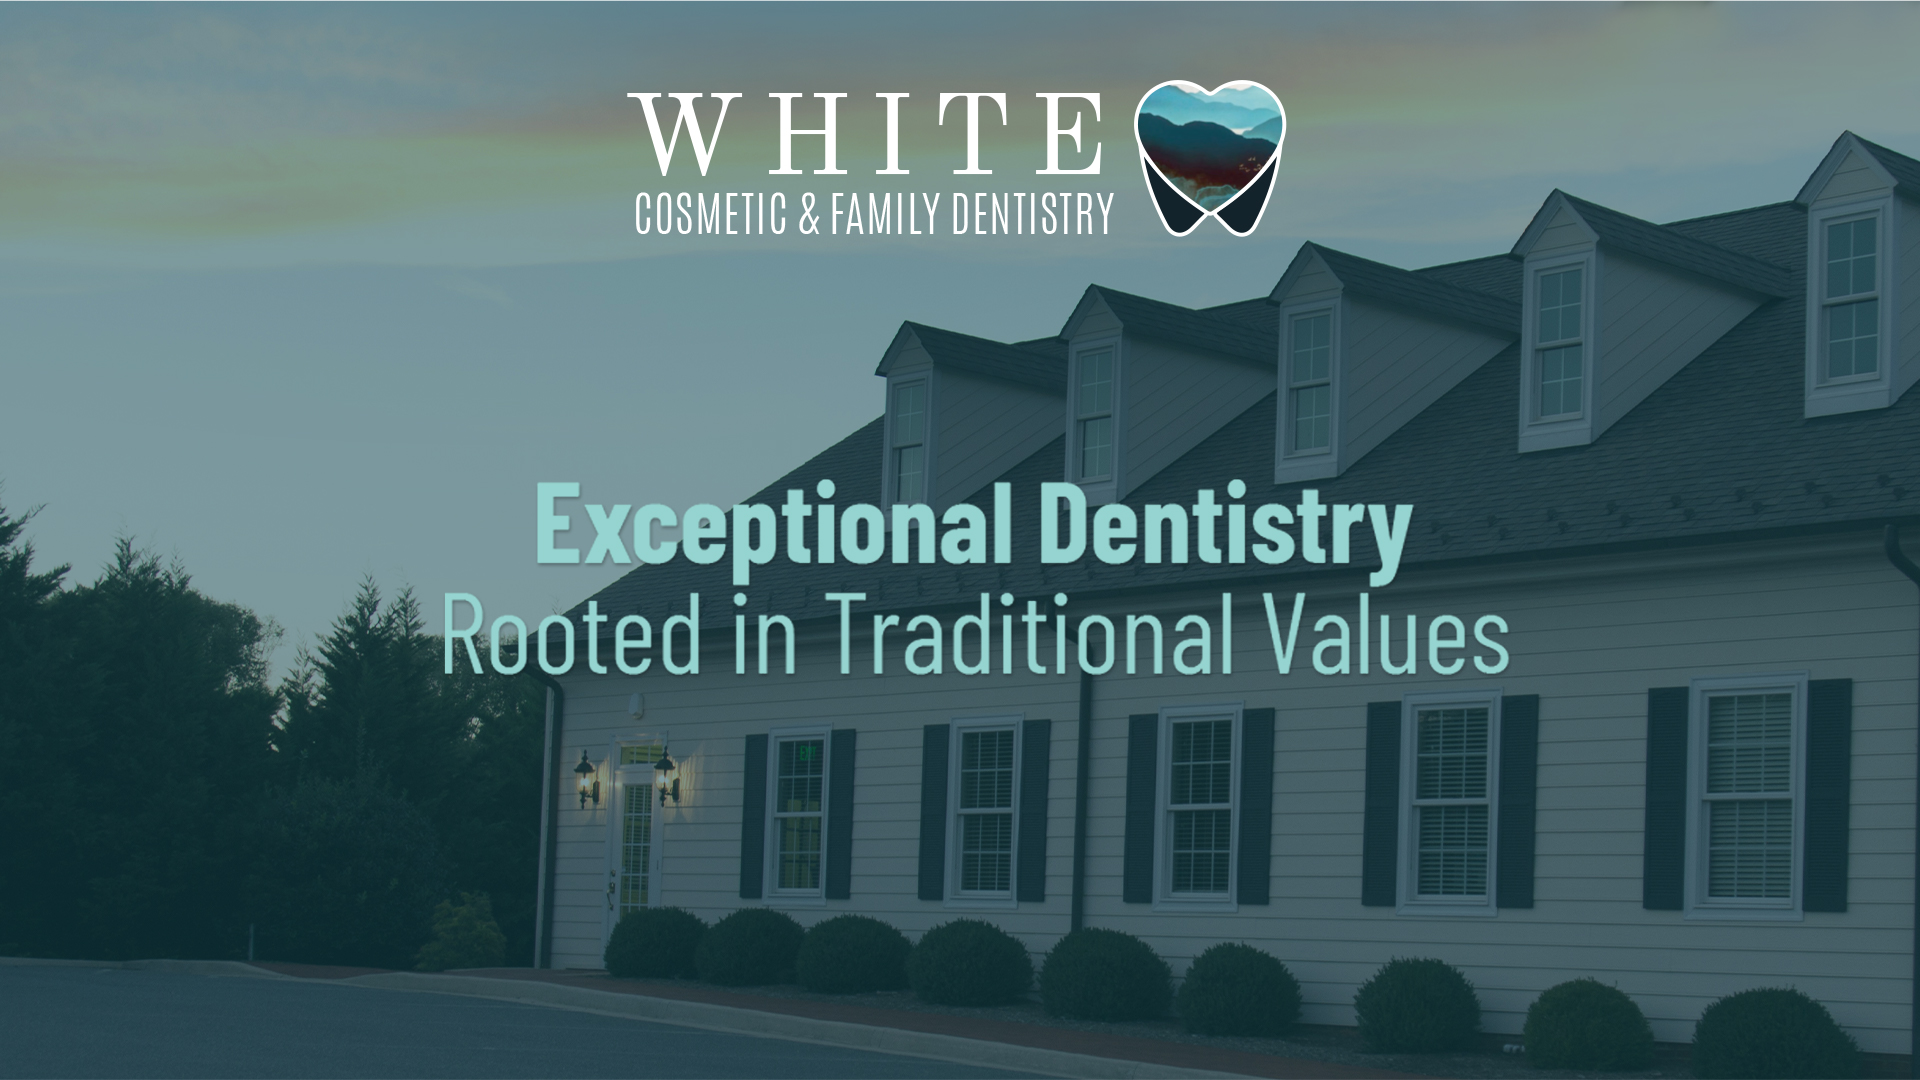 White Cosmetic & Family Dentistry